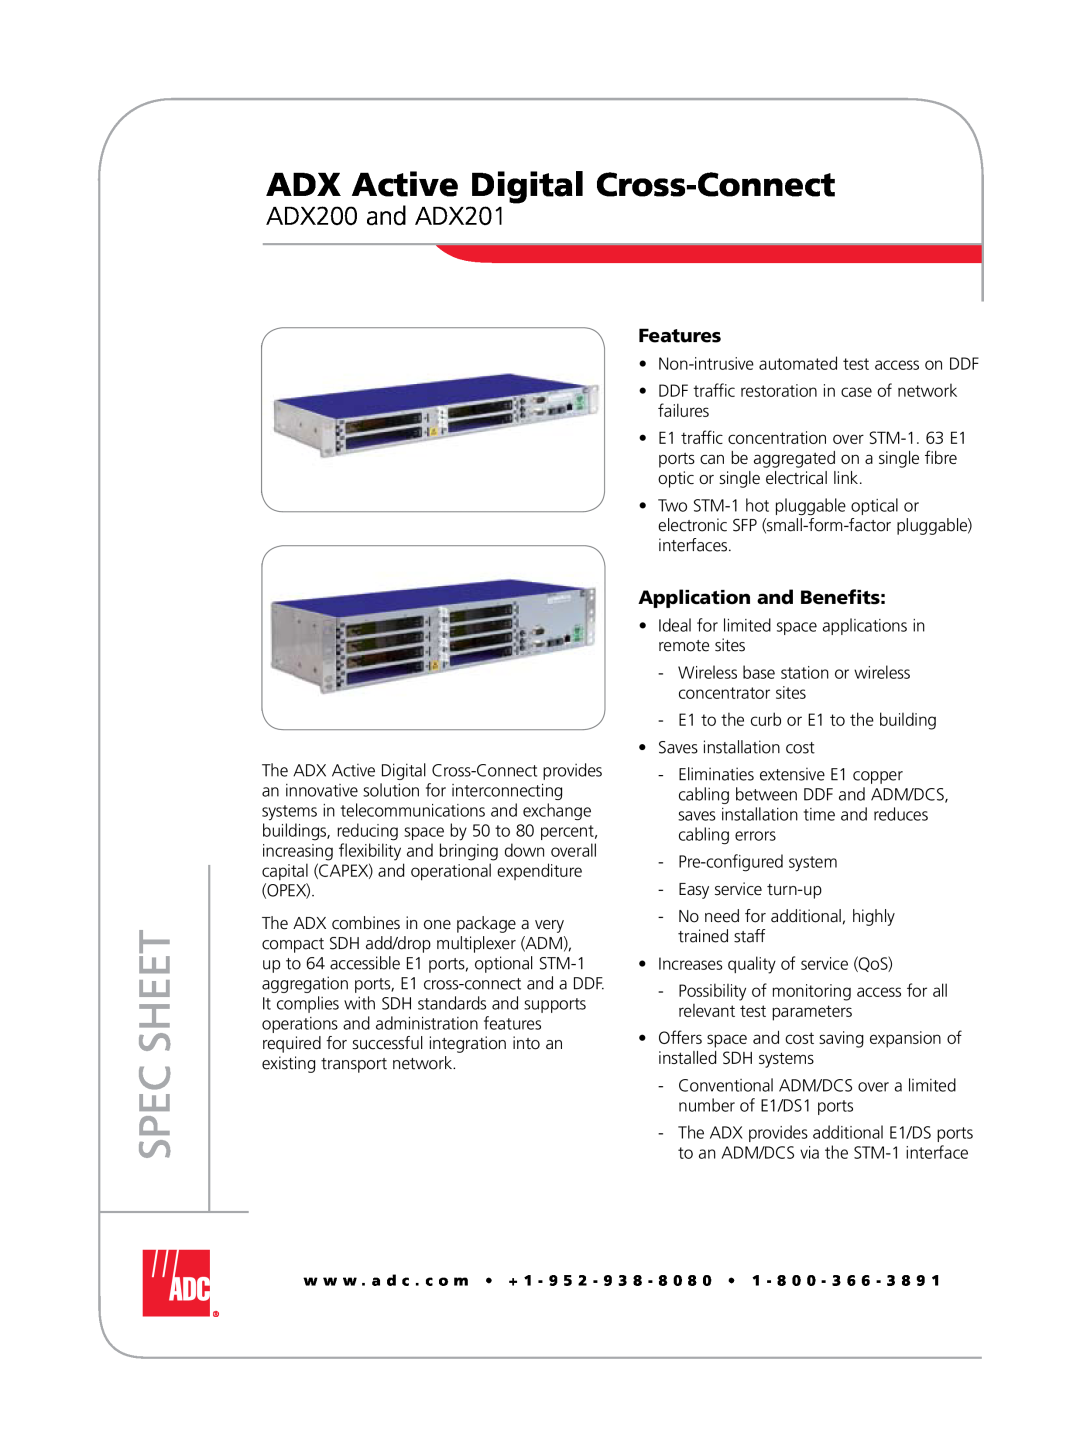 ADC manual ADX200 and ADX201, Spec Sheet, ADX Active Digital Cross-Connect, Features, Application and Benefits 